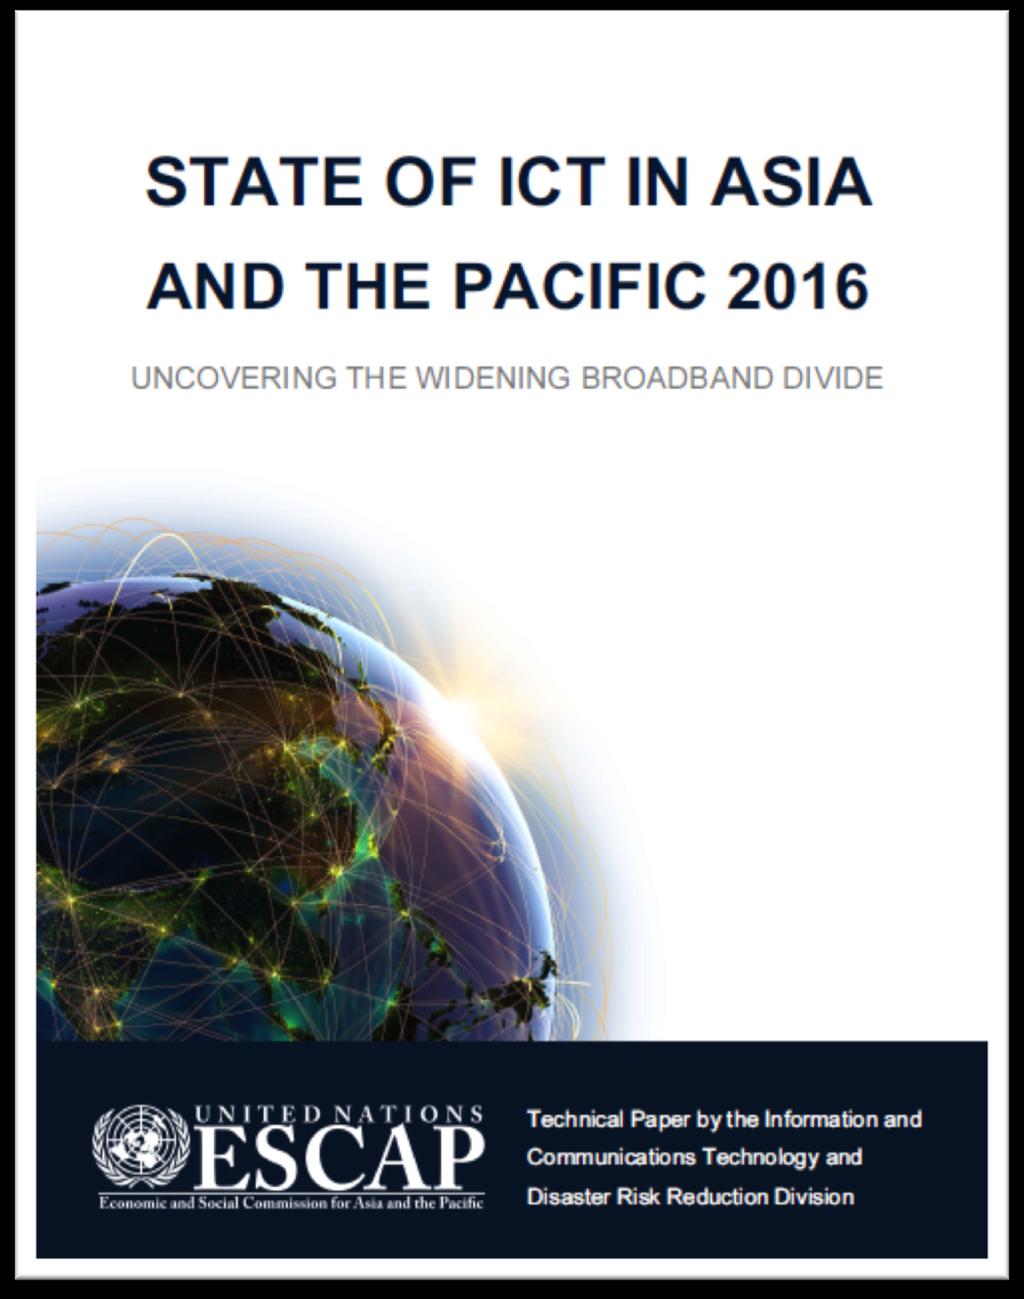 5 State of ICT Analyzed the broadband digital divide in Asia and the Pacific Reviewed